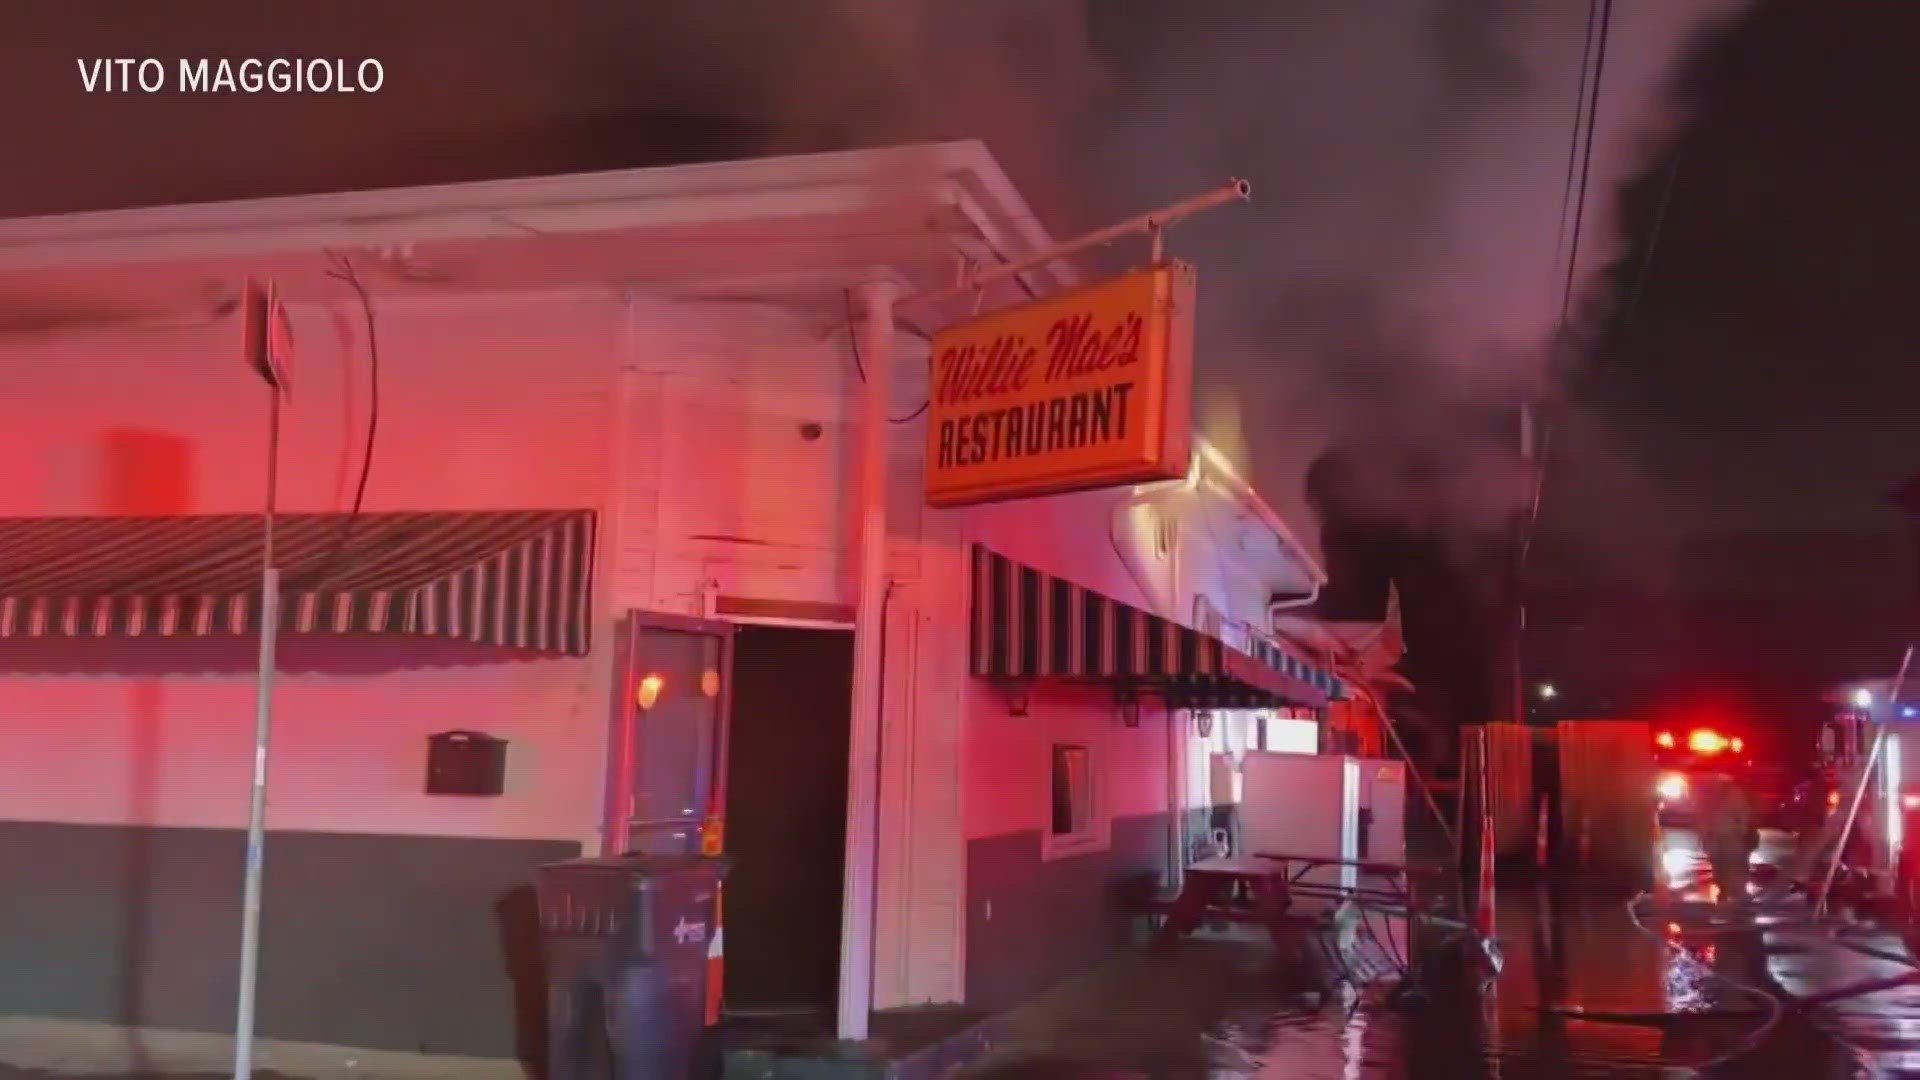 The fire is a devastating blow to the community that regularly attended the historic restaurant.